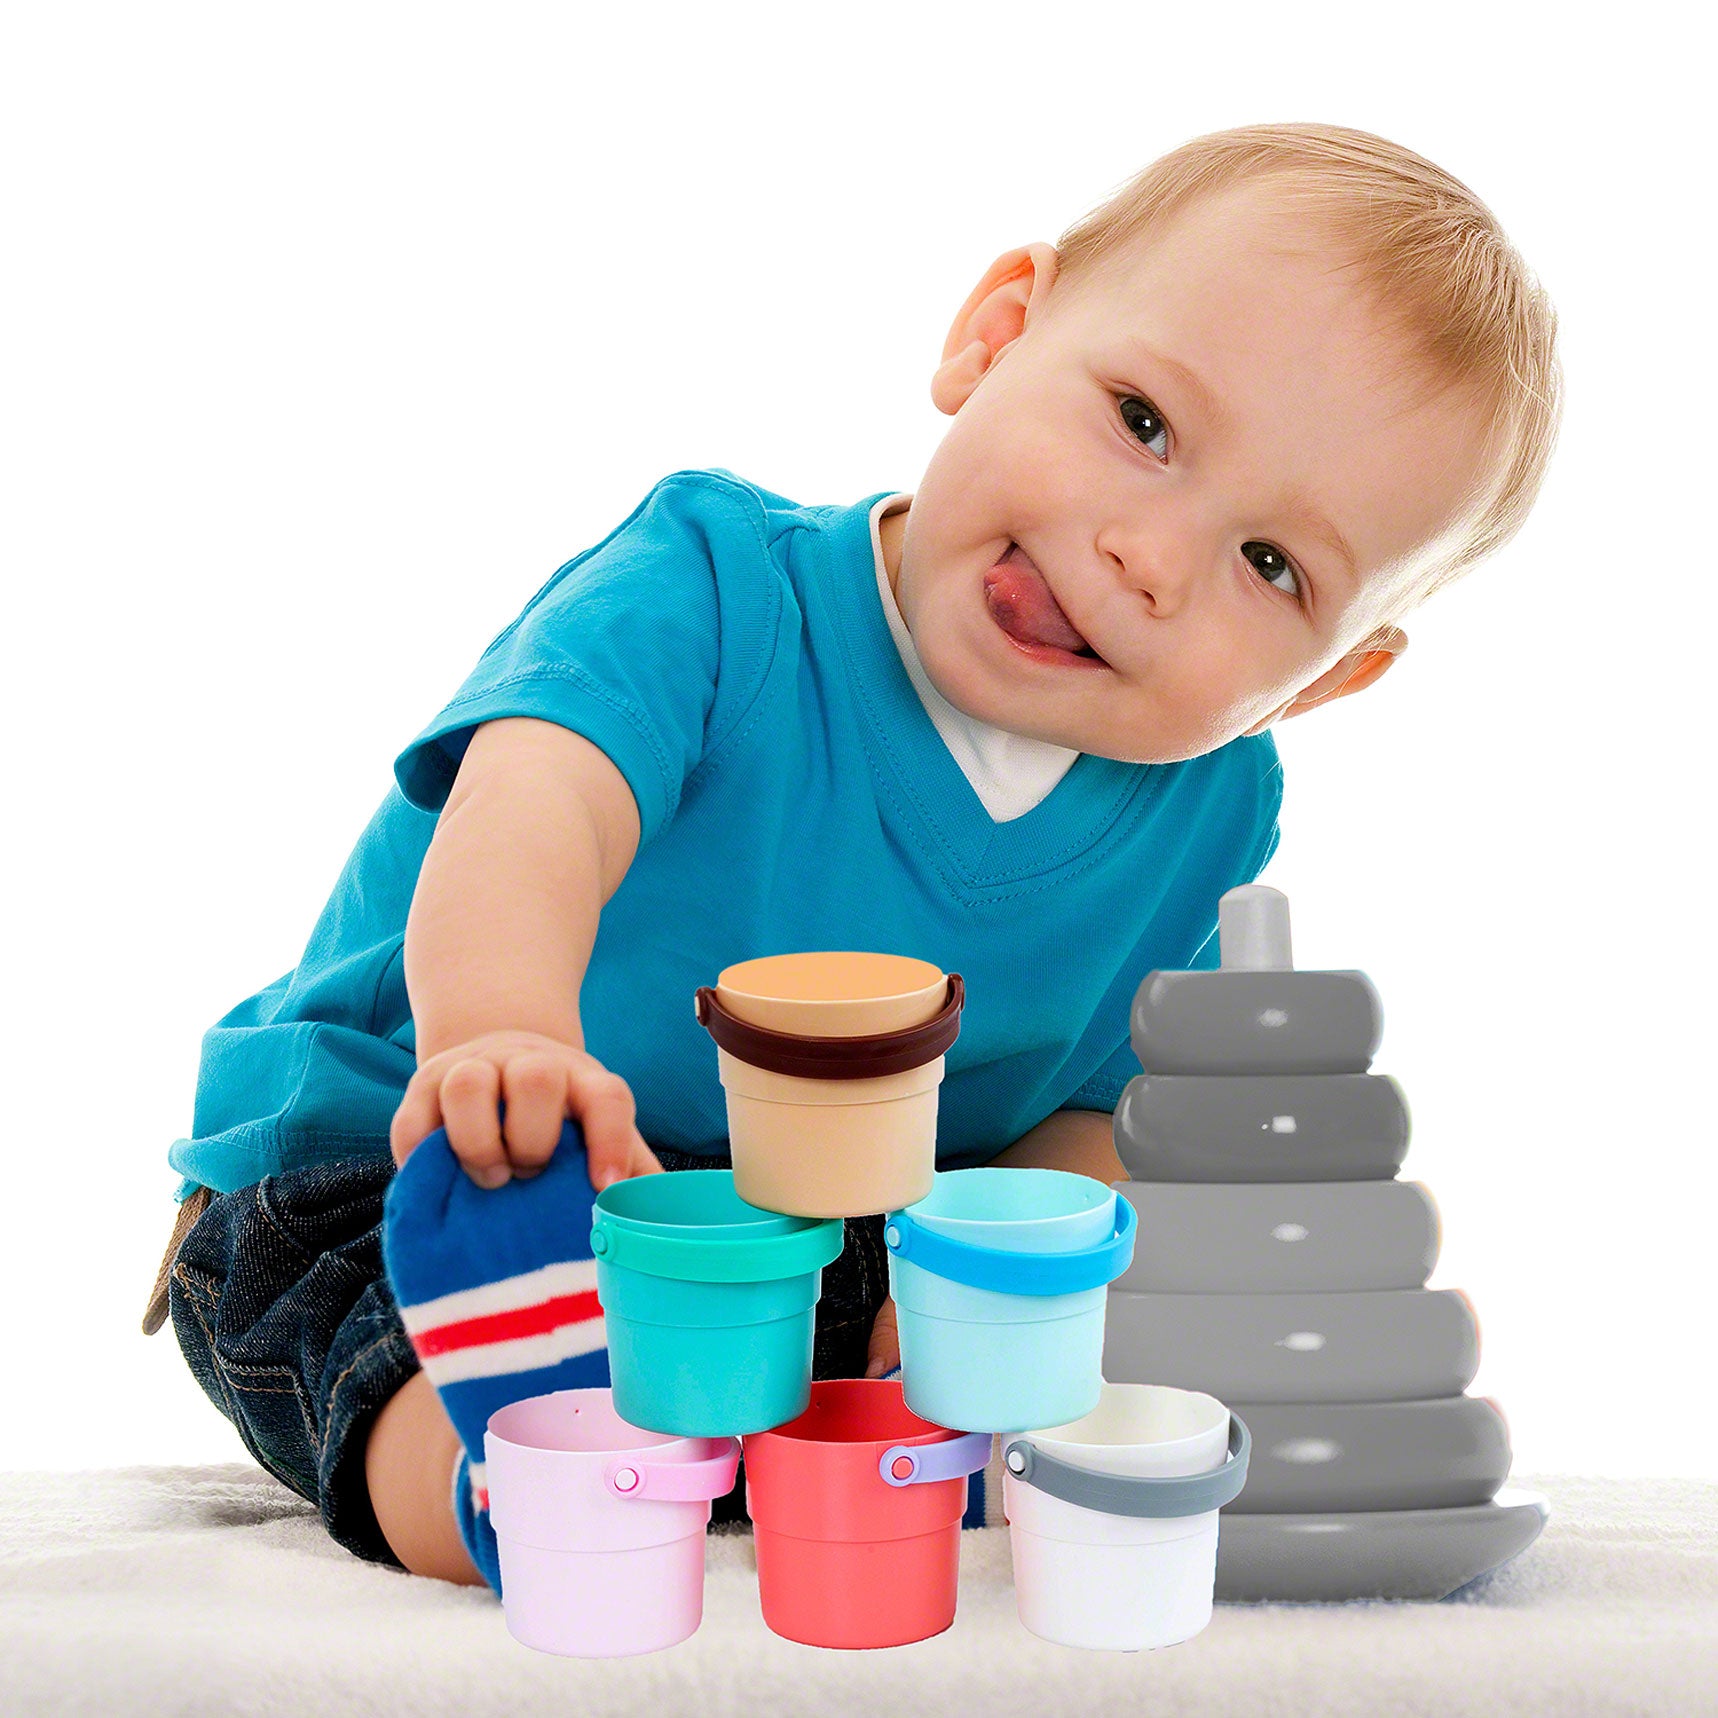 Baby Stacking Cups, Toddler Stacking Toys For 1 2 3 Years Old Boys Girls  Bath Stacking Cups For 6-12 Months Toddlers Baby Bath Cups